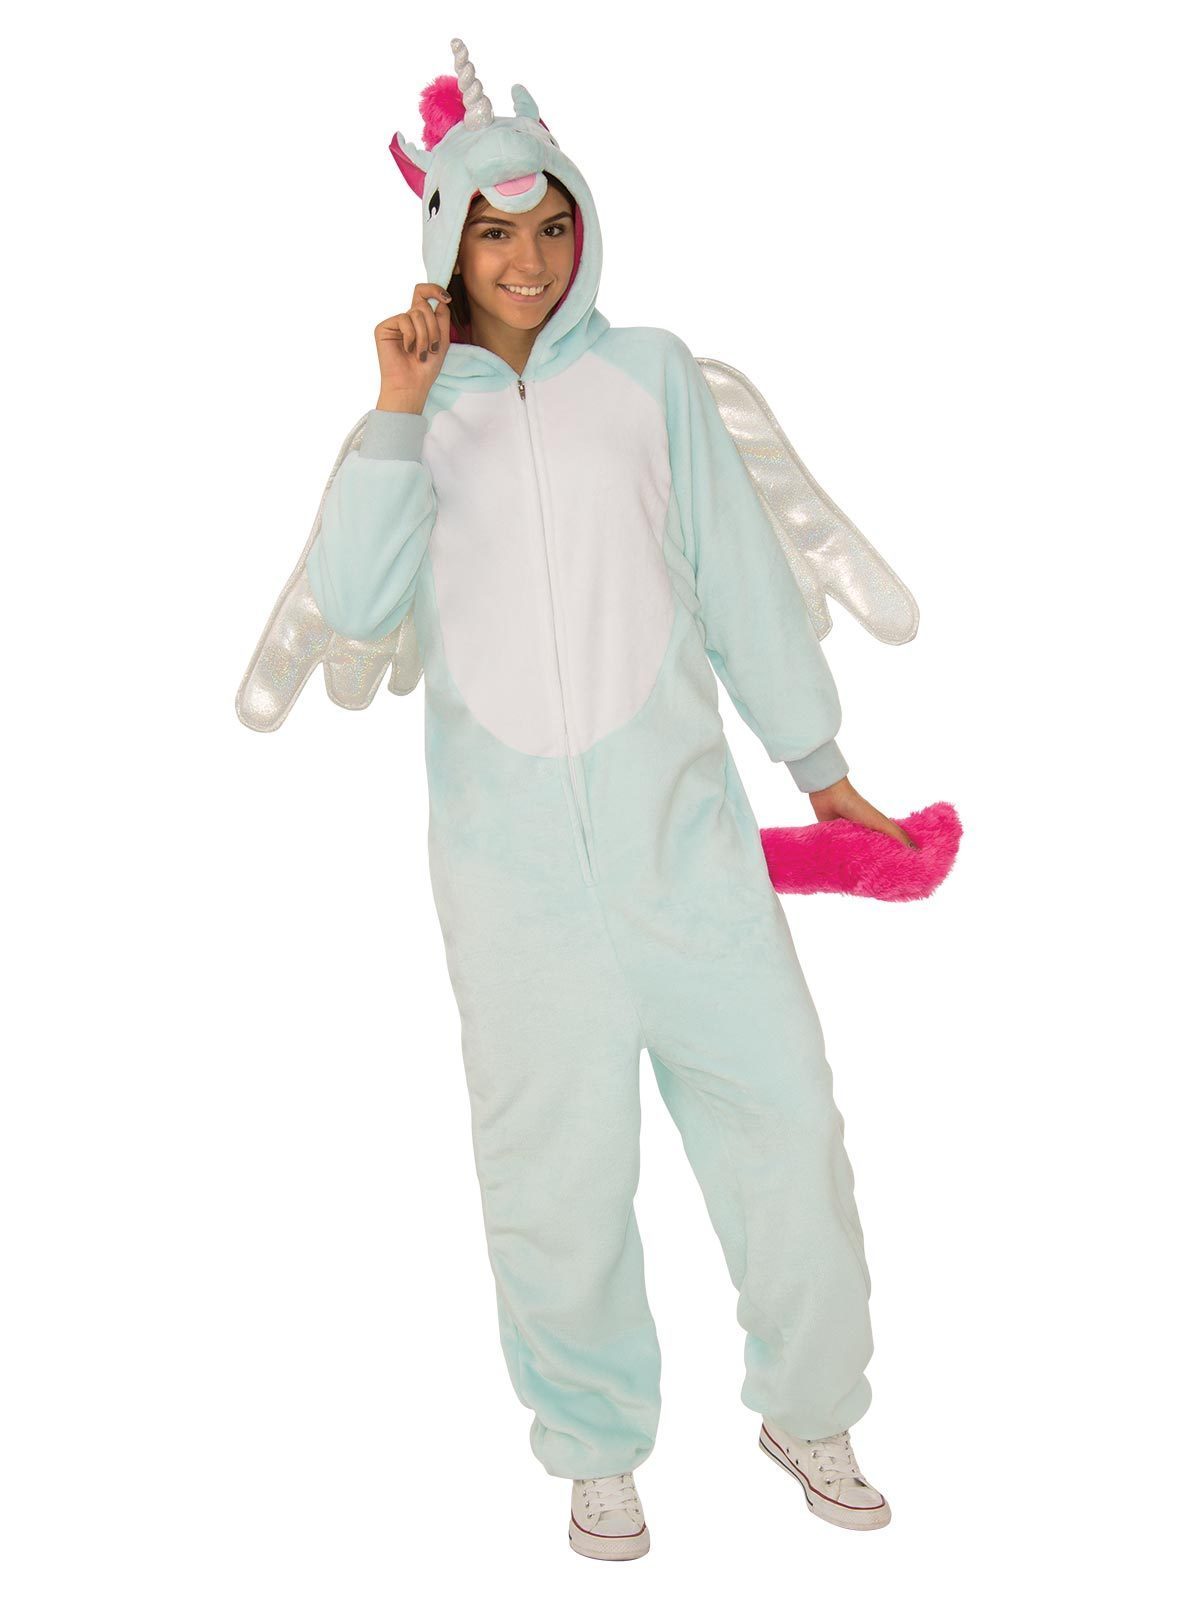 Pegacorn Furry Onesie Costume for Adults